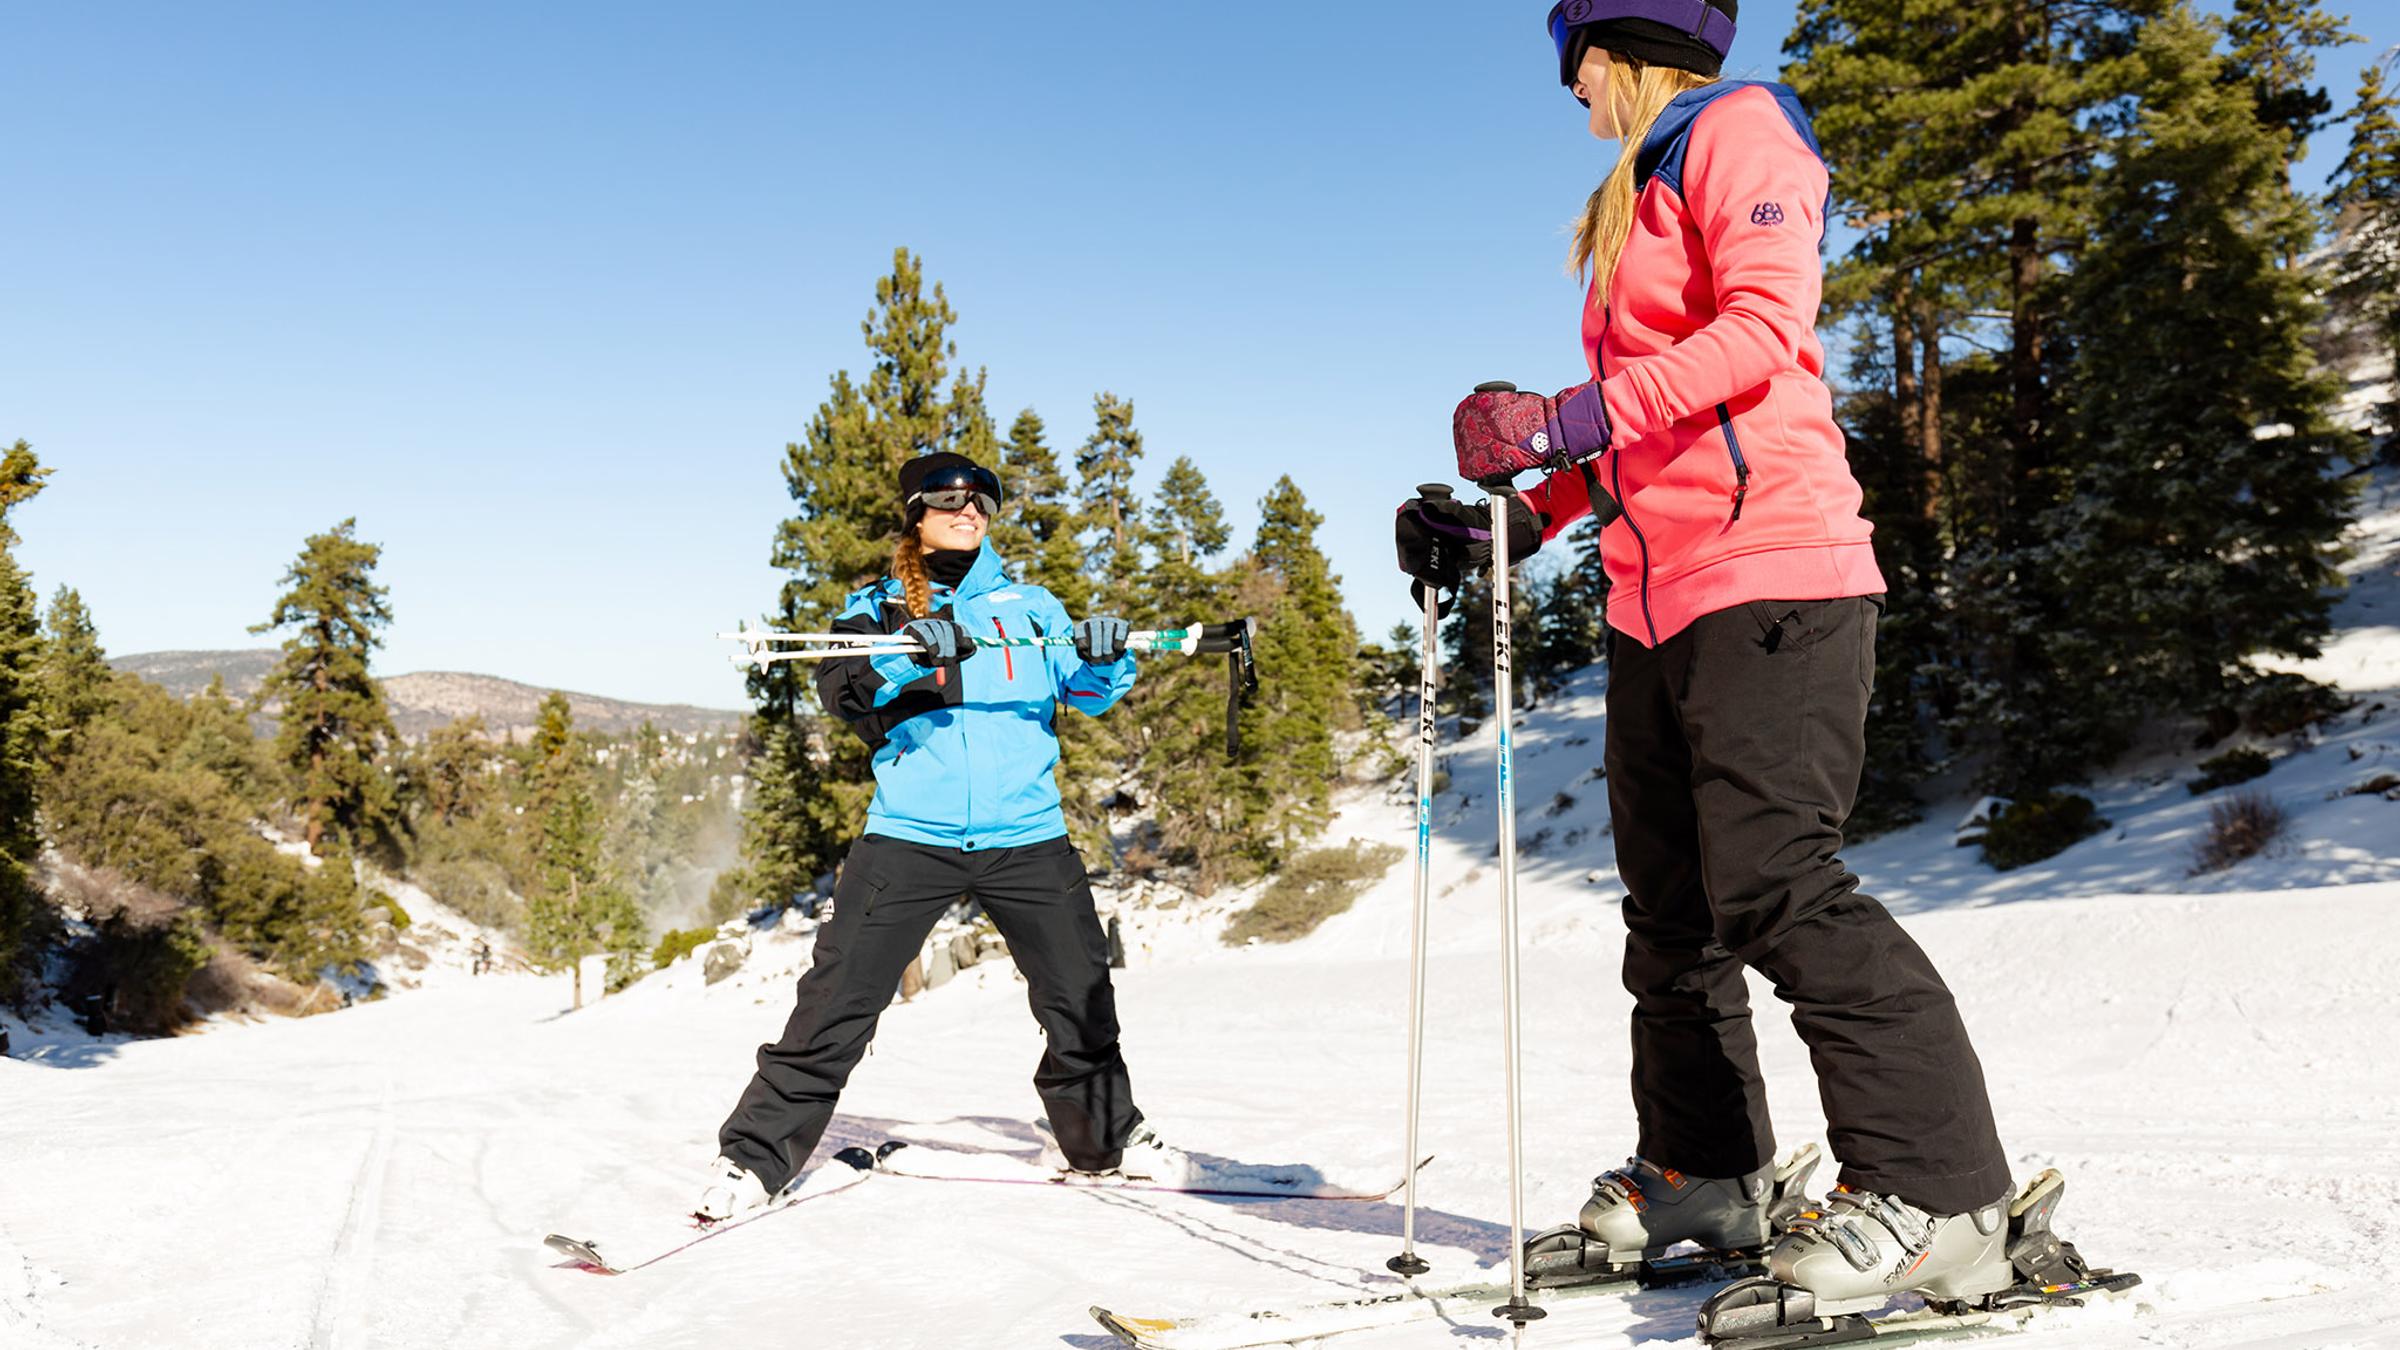 Skier in a pink jacket taking a ski lesson with an instructor.